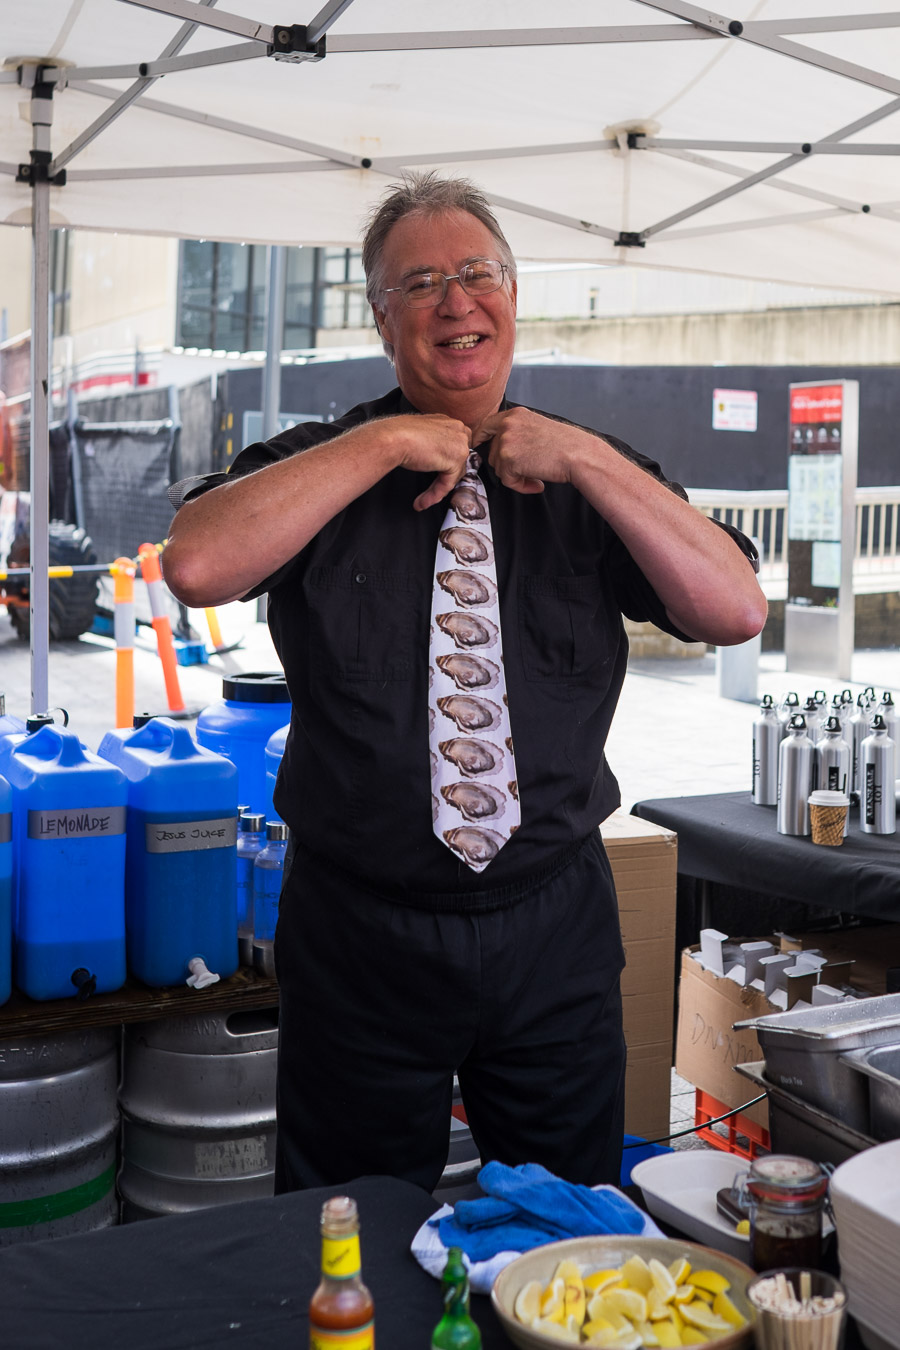 I caught Jerry Fraser putting  on his oyster tie.